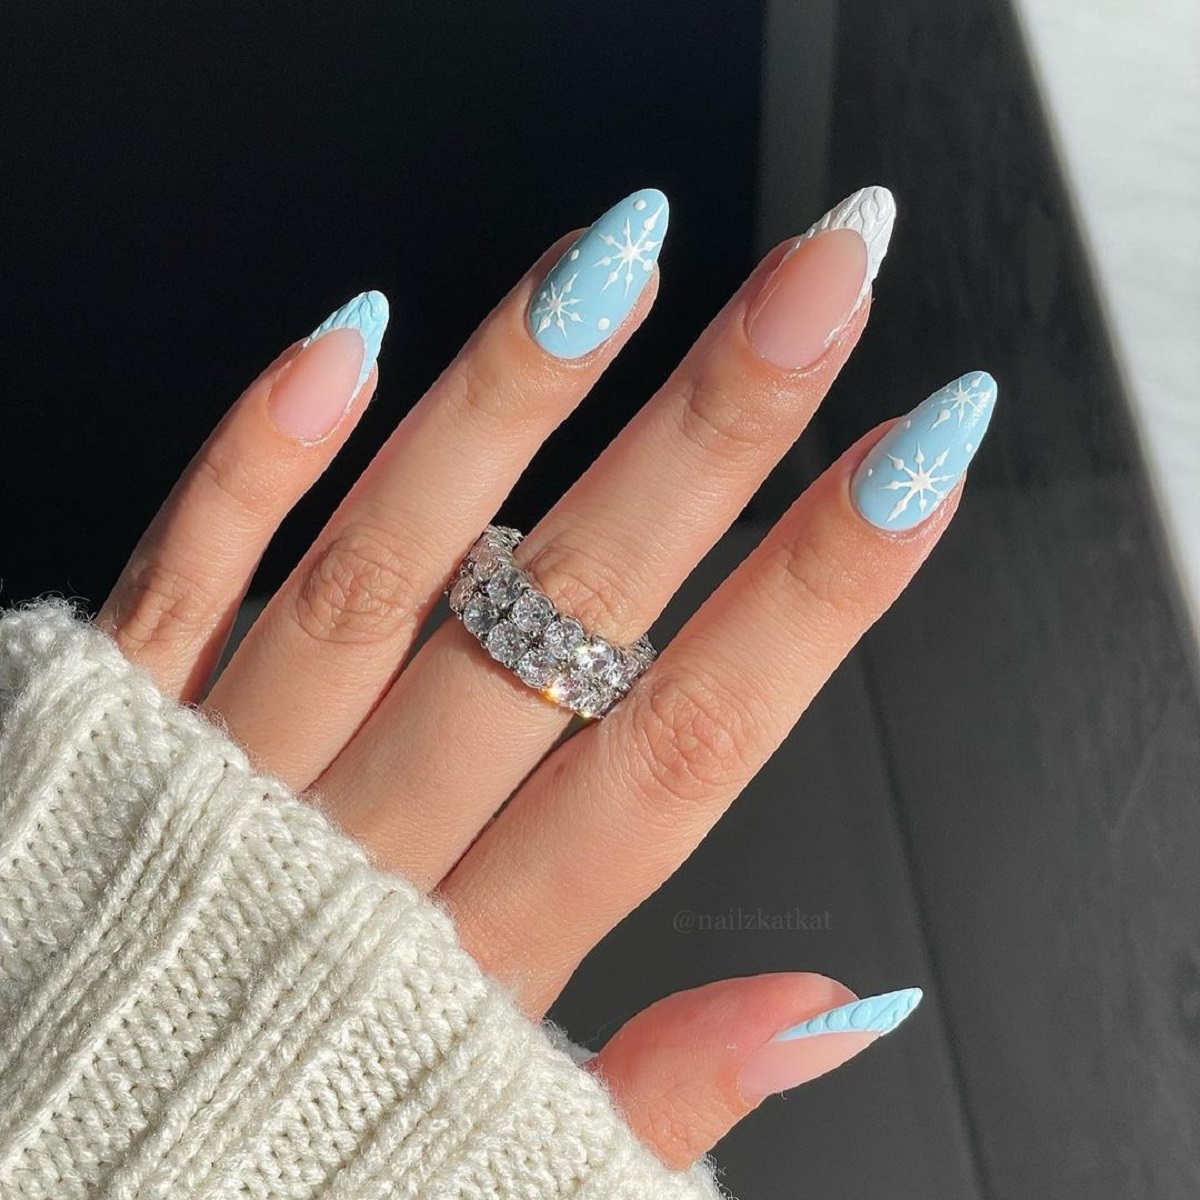 Snowy Blue Manicure With Sweater Inspired French Tips